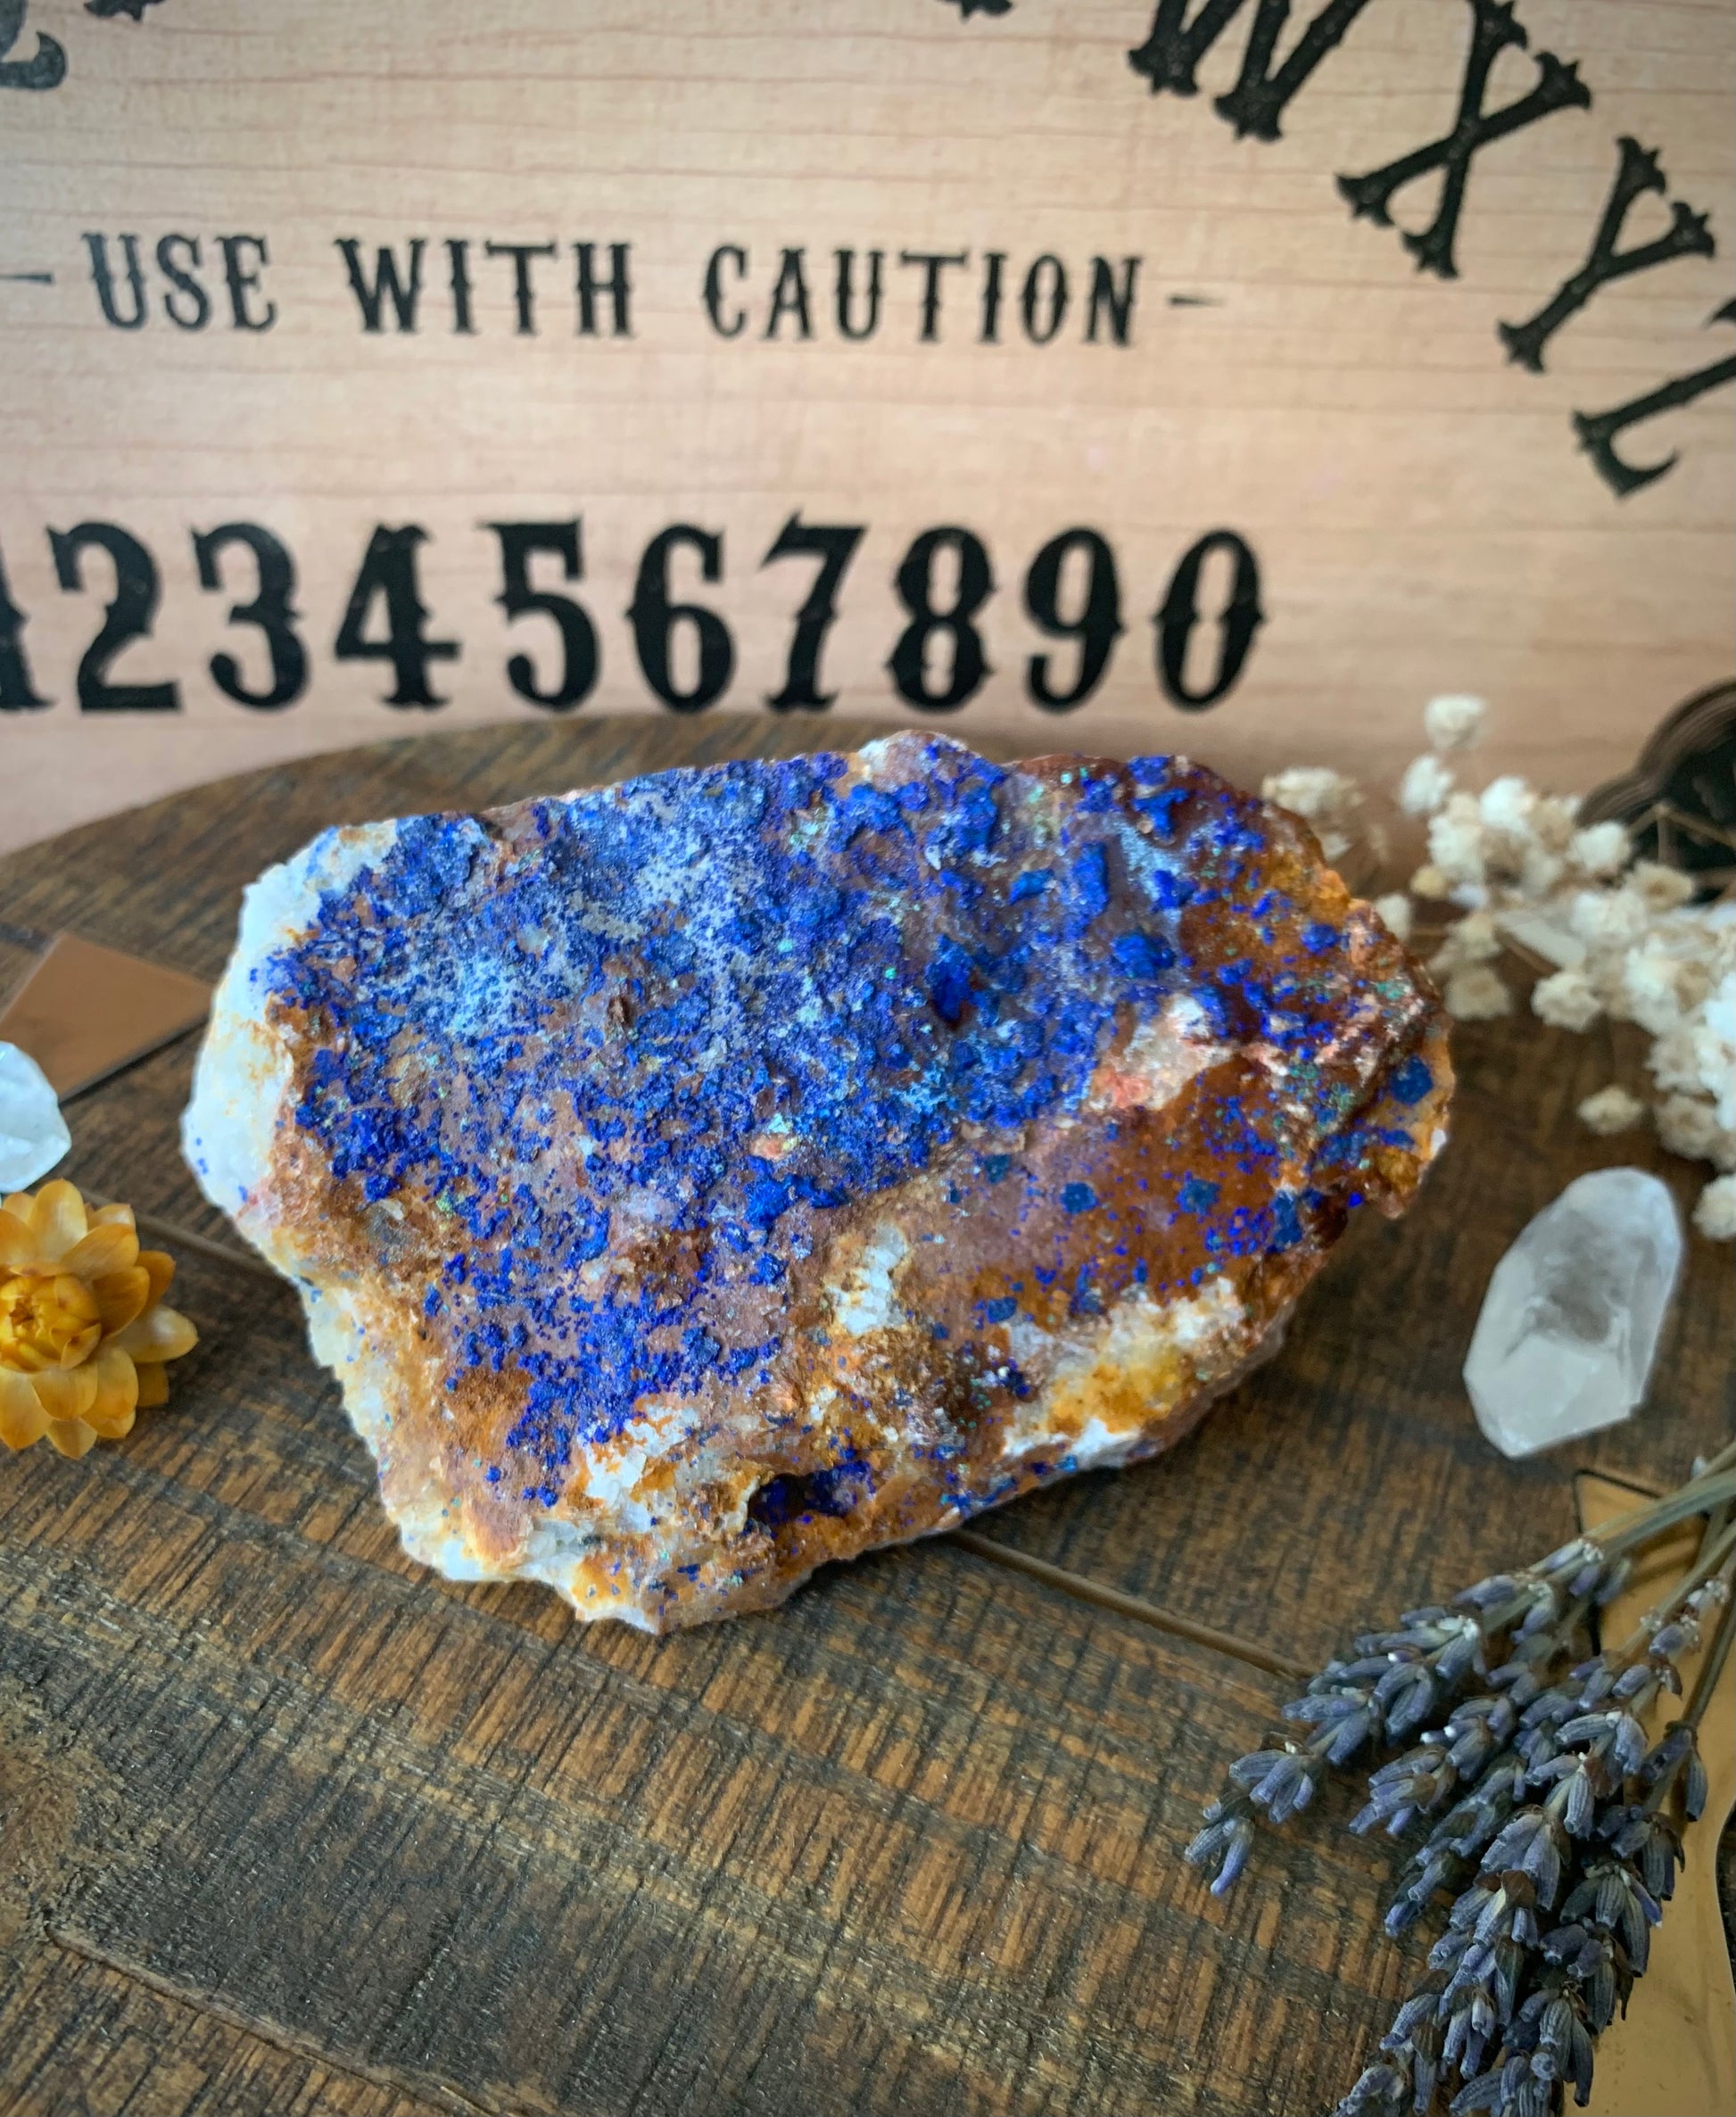 A raw chunk of azurite with malachite & mica on a wooden surface with flowers and quartz crystals around it. A ouija board is the background.